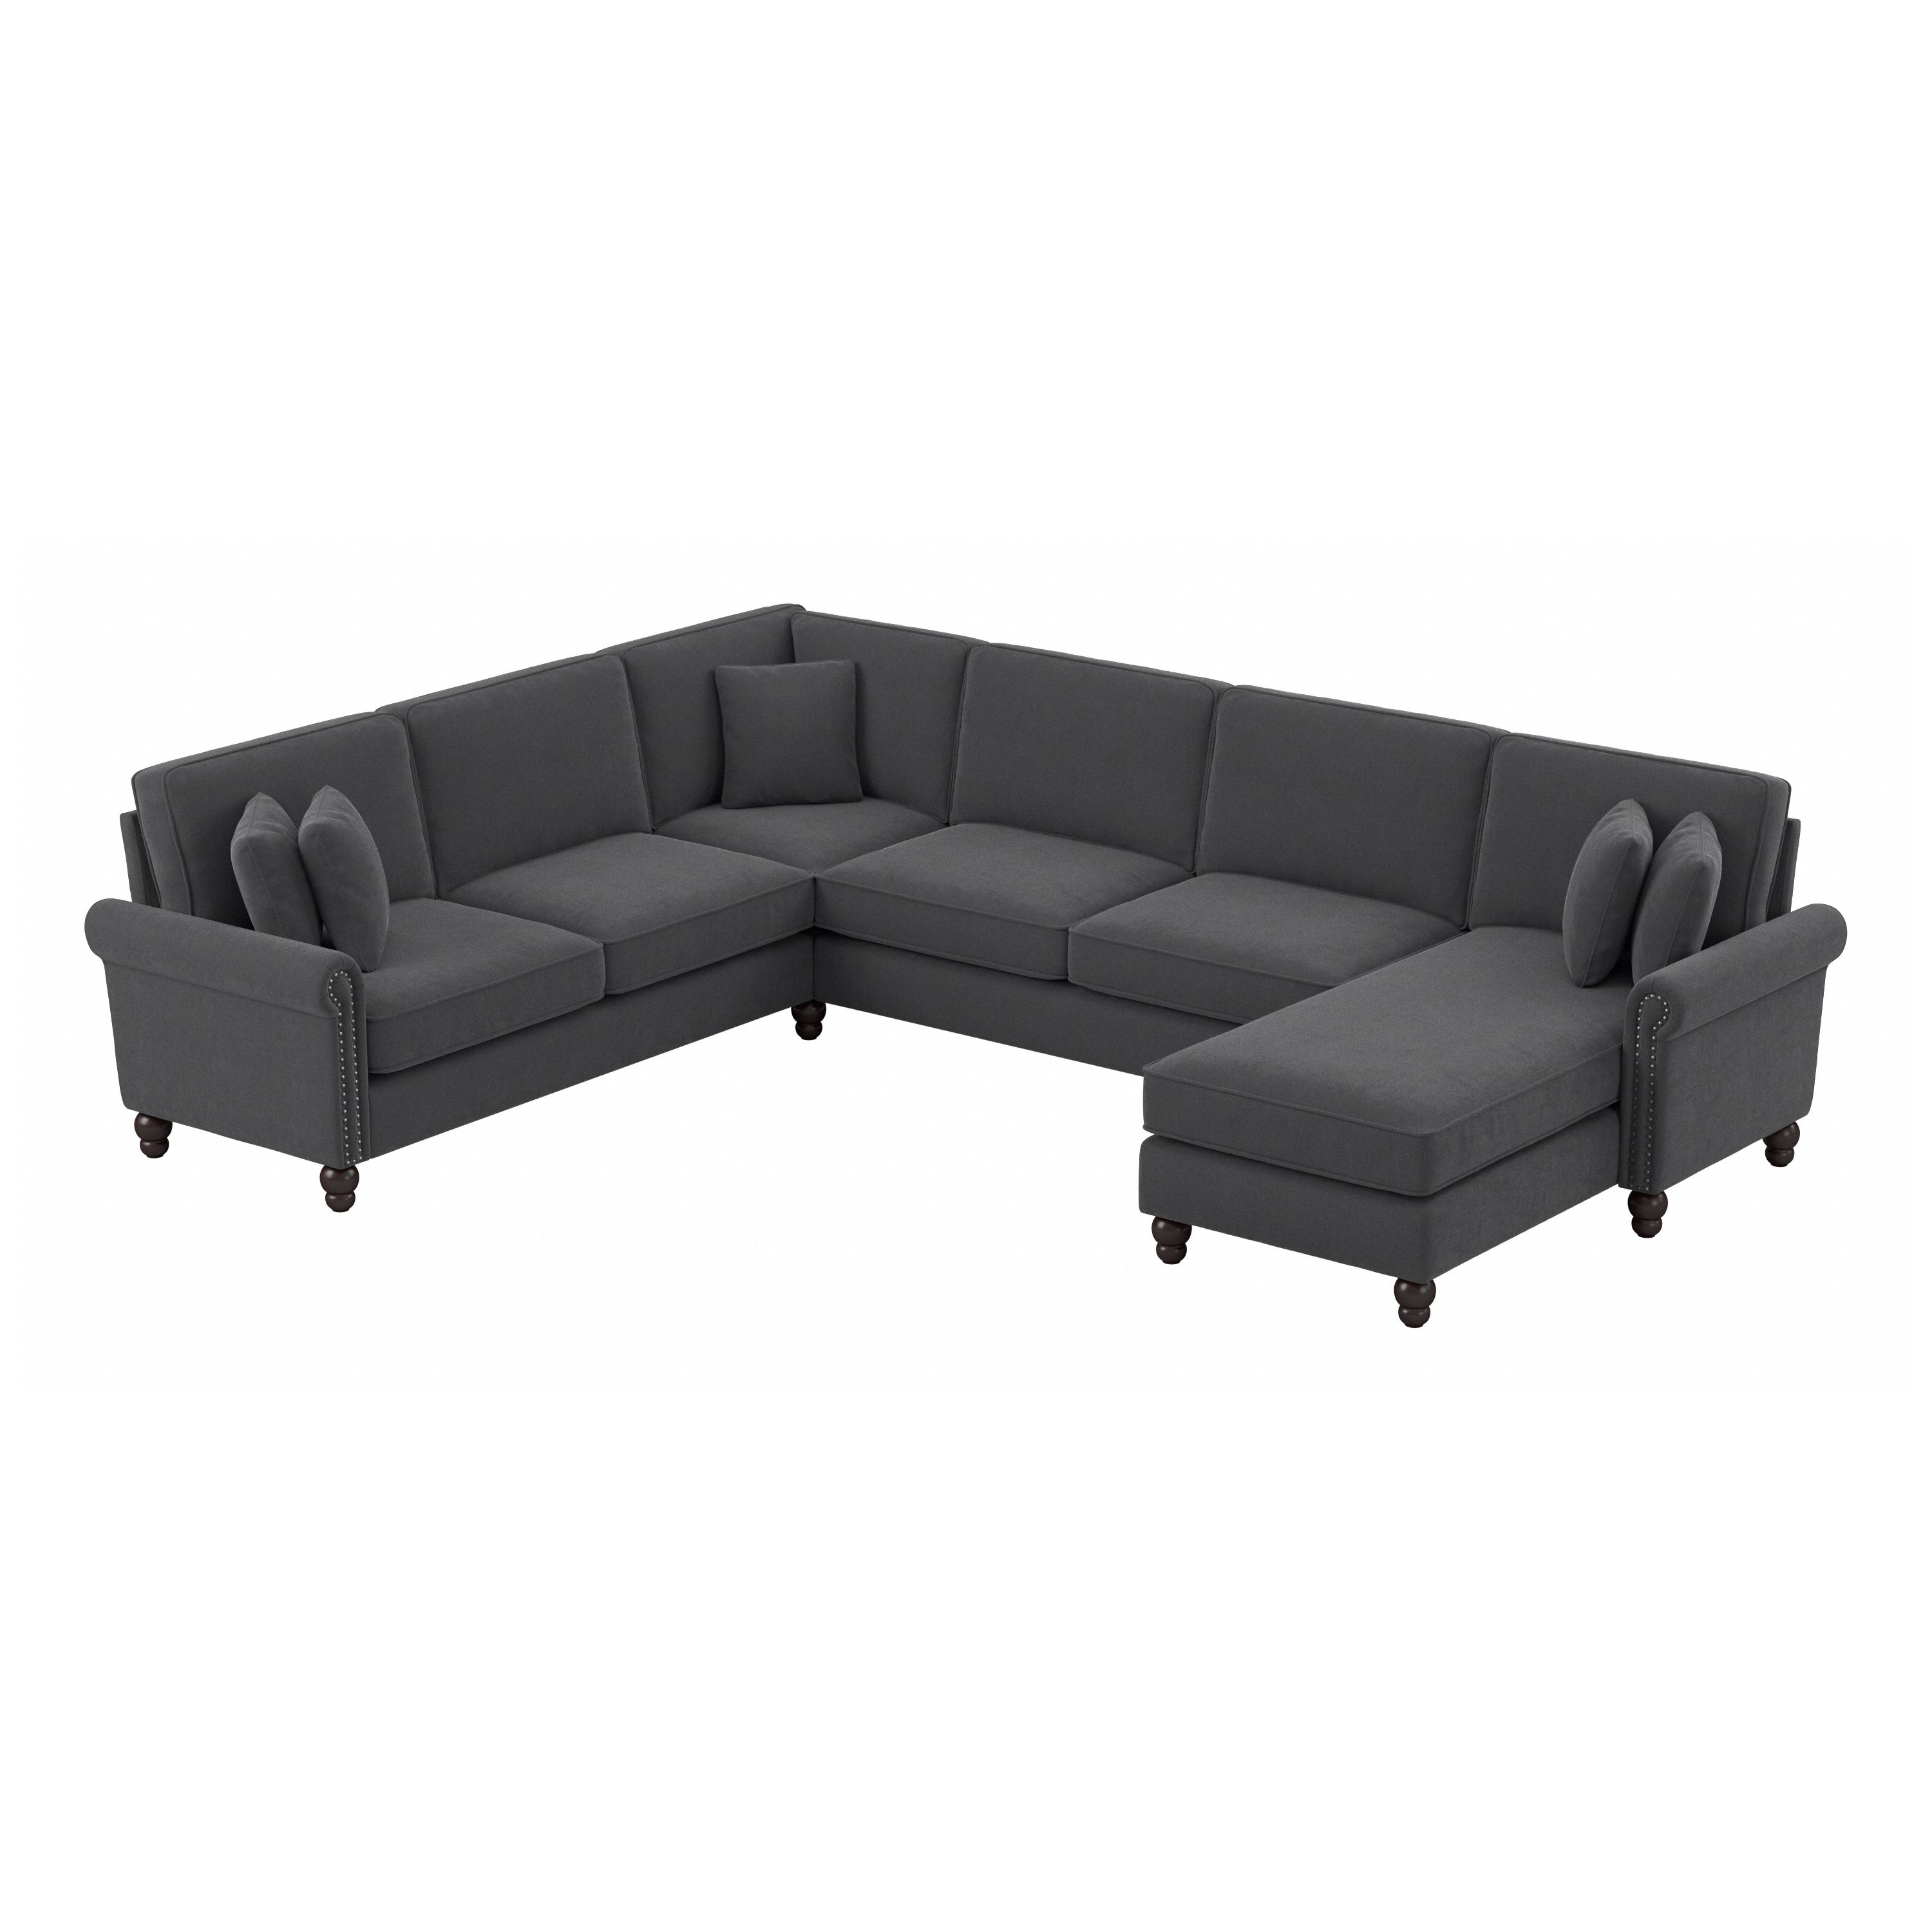 Shop Bush Furniture Coventry 128W U Shaped Sectional Couch with Reversible Chaise Lounge 02 CVY127BCGH-03K #color_charcoal gray herringbone fabr